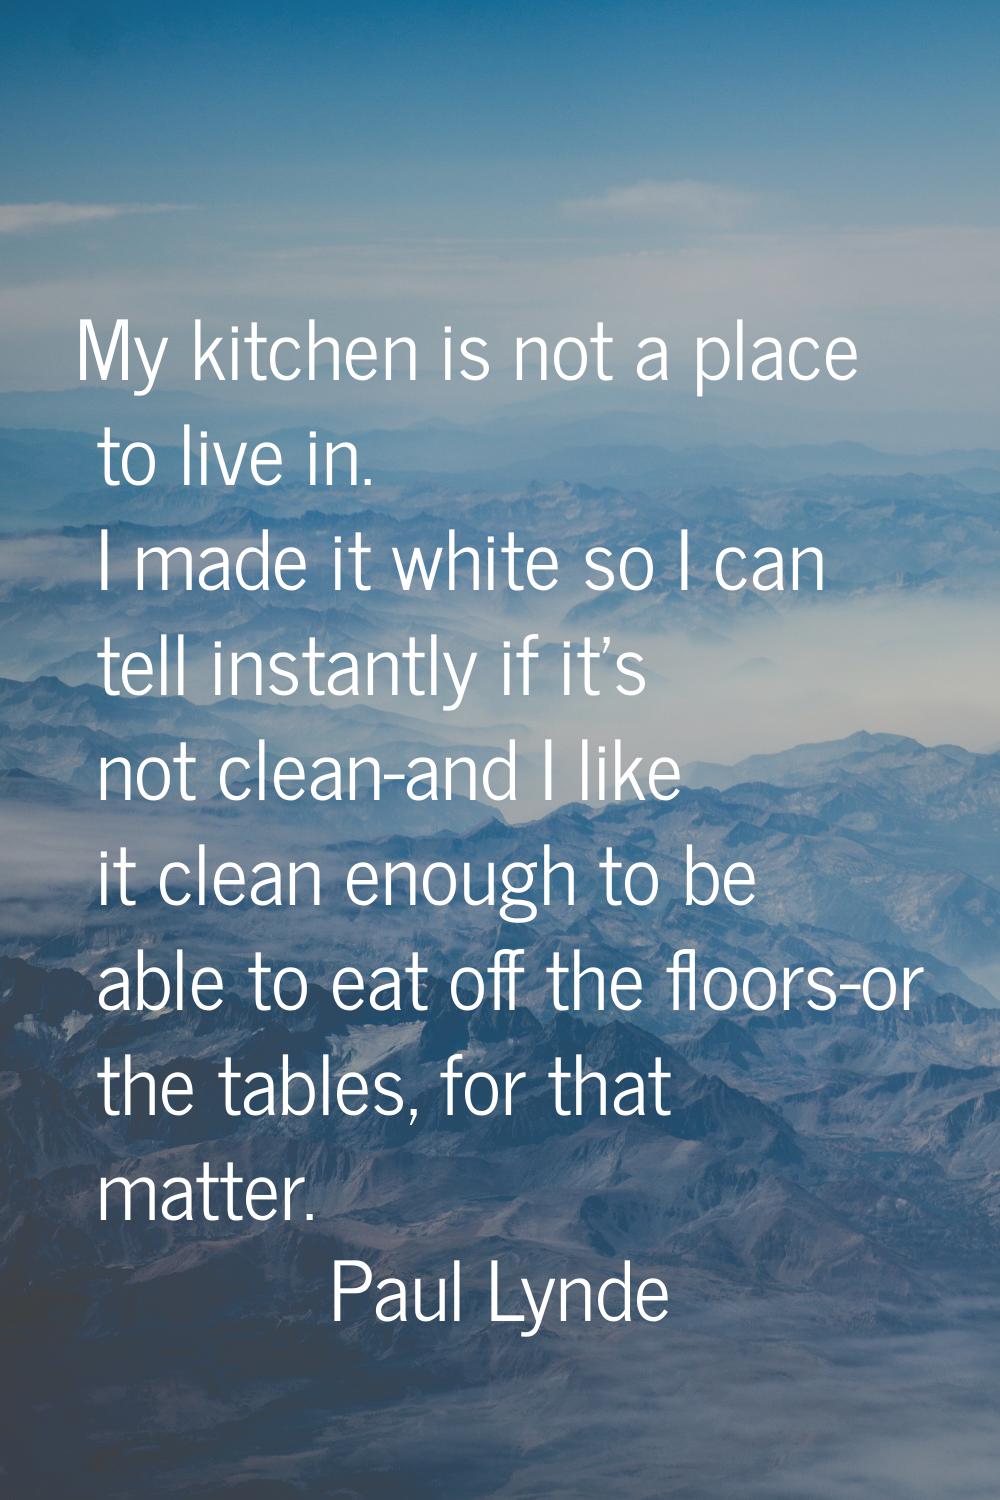 My kitchen is not a place to live in. I made it white so I can tell instantly if it's not clean-and